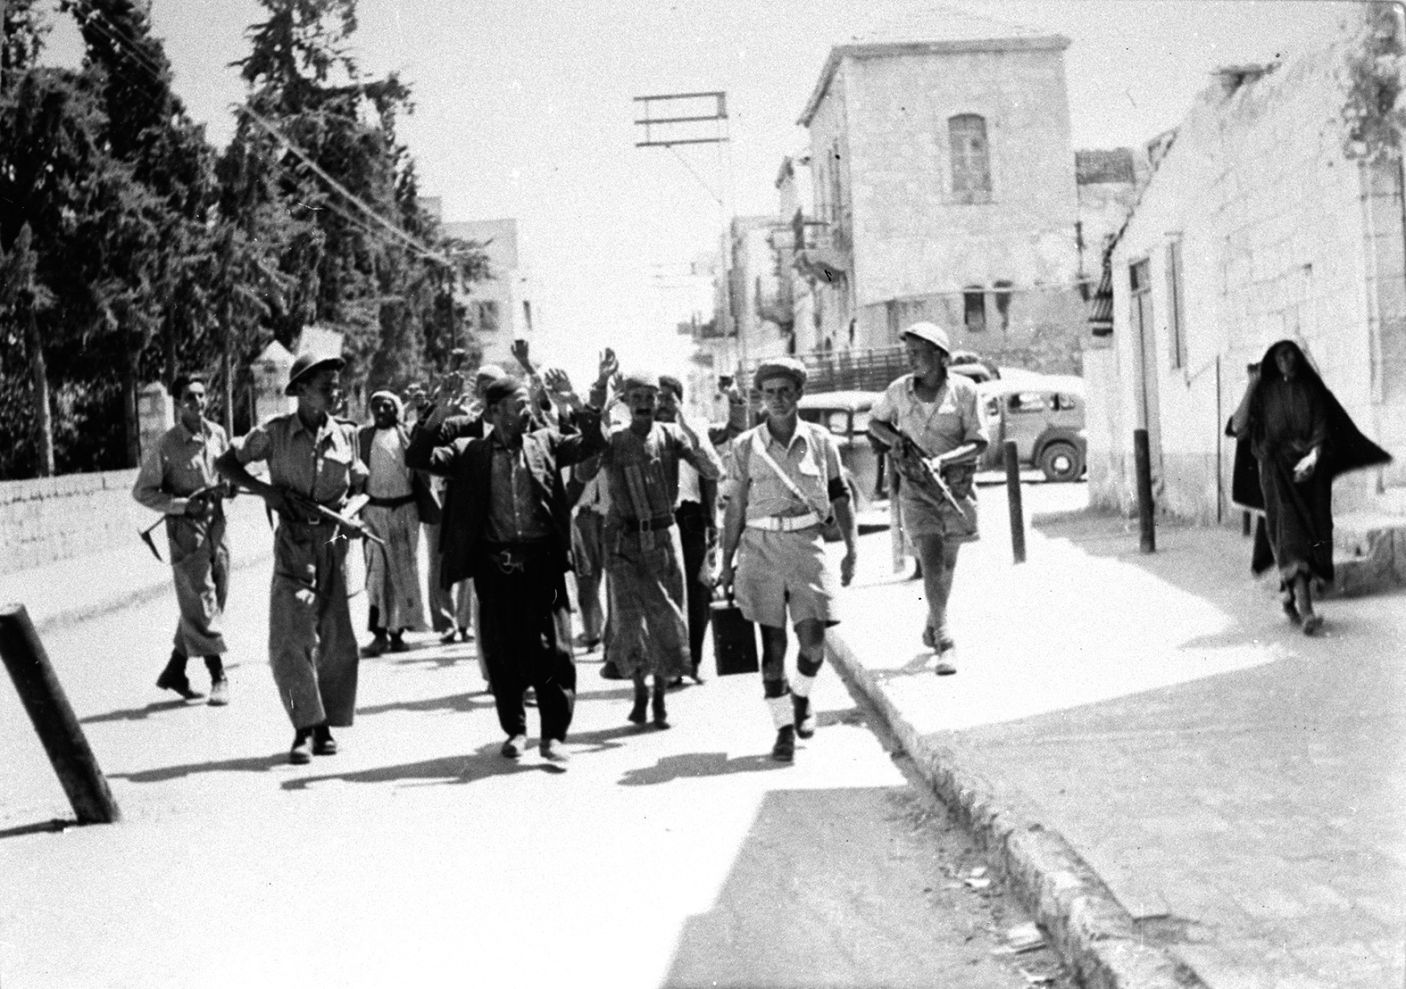 IDF soldiers guarding Palestinians in Ramle, in 1948. Collection of Benno Rothenberg/The IDF and Defense Establishment Archives